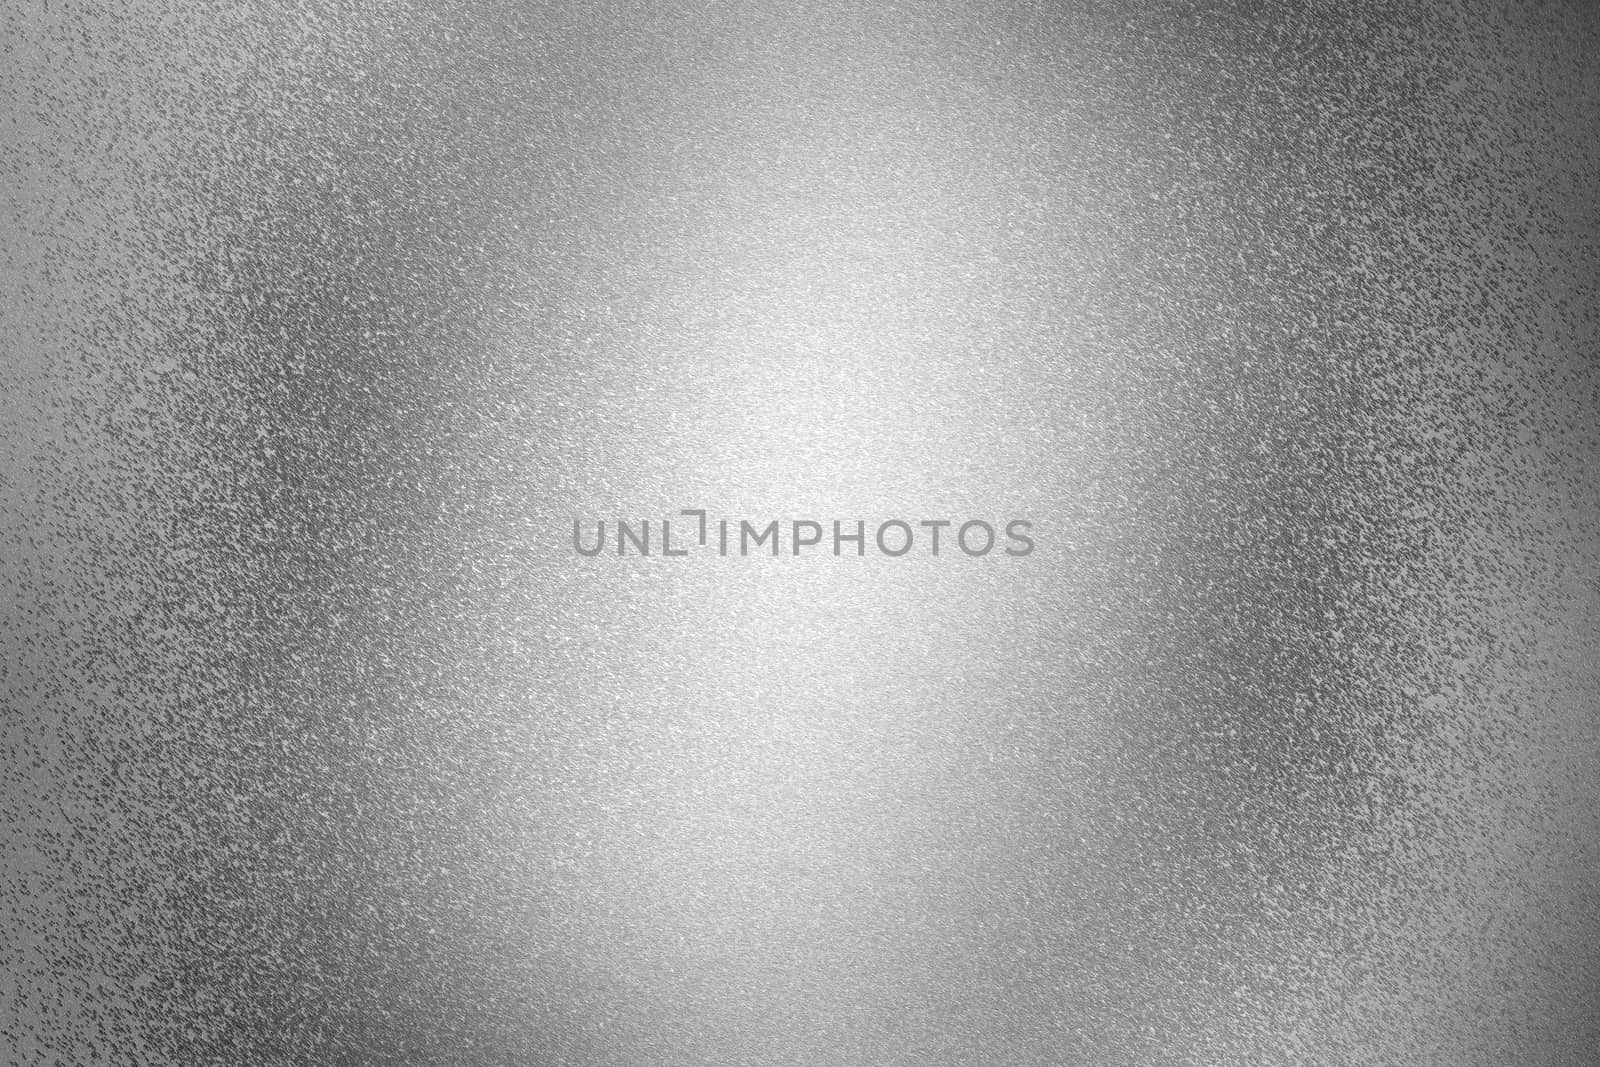 Glowing rough silver metal wall surface, abstract texture background